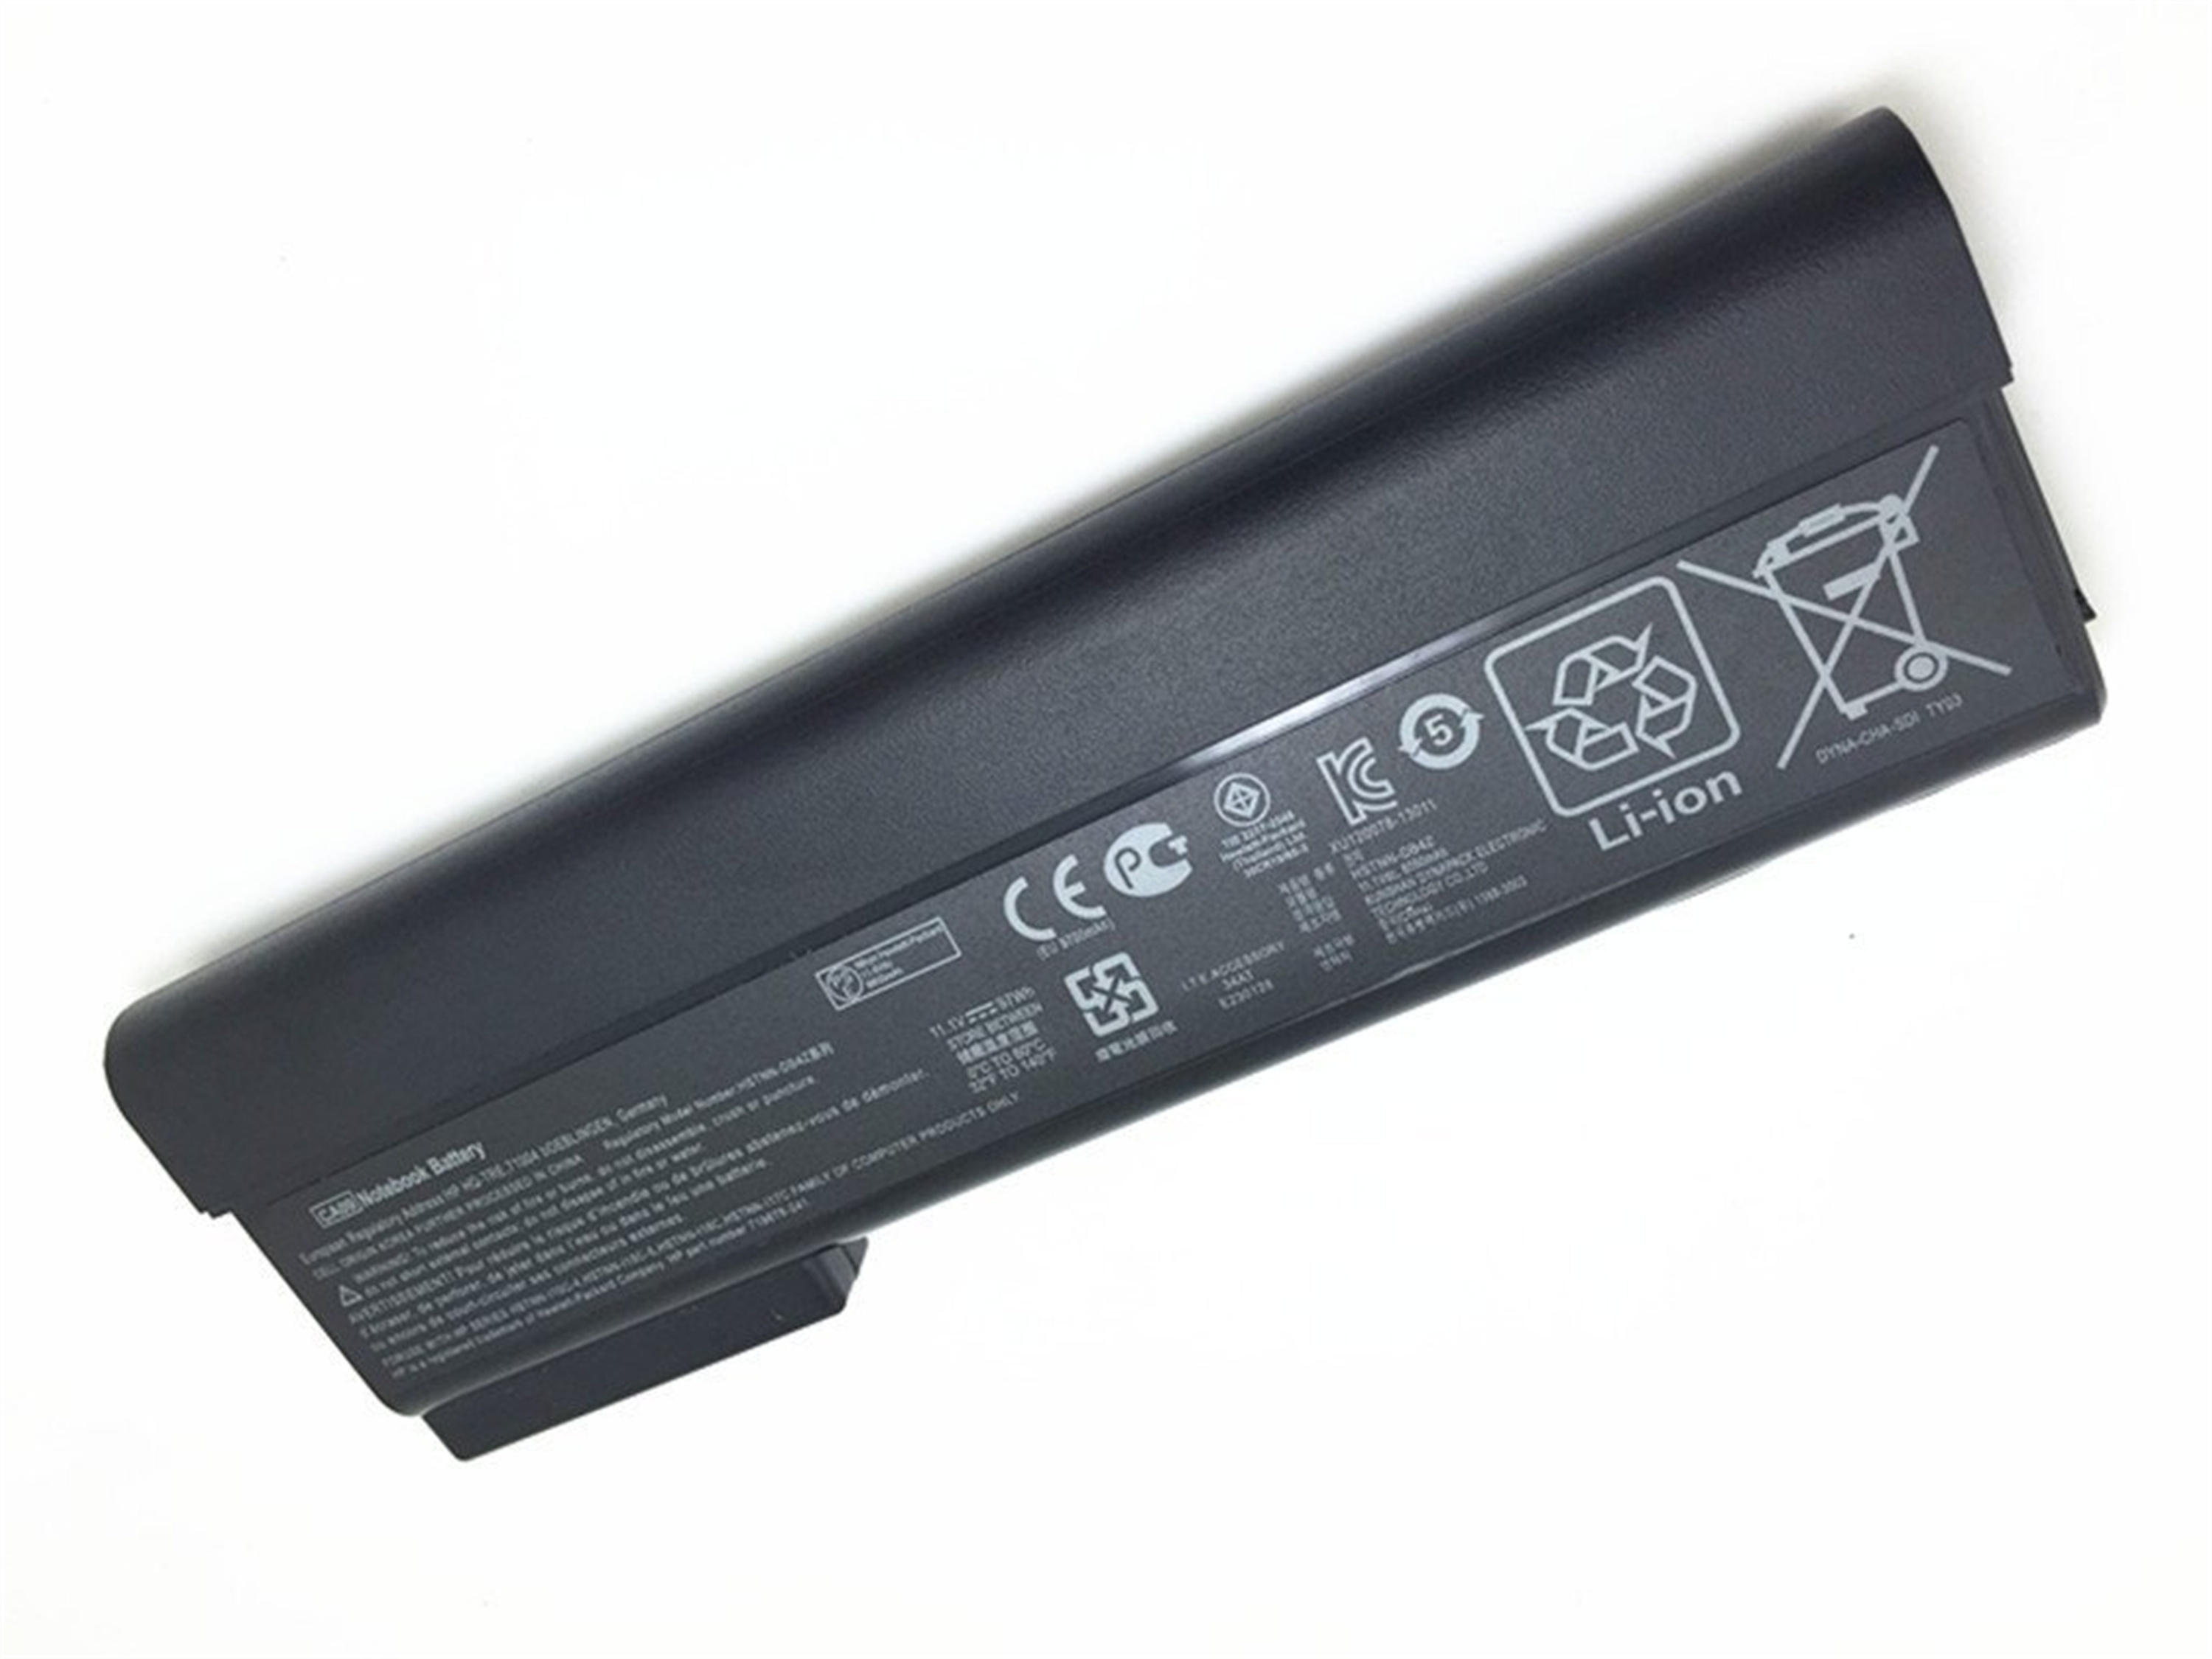 CA09 rechargeable lithium ion Notebook battery Laptop battery CA06XL CA09 11.1V 97Wh for HP laptop ProBook 640 645 650 655 G0 G1 series